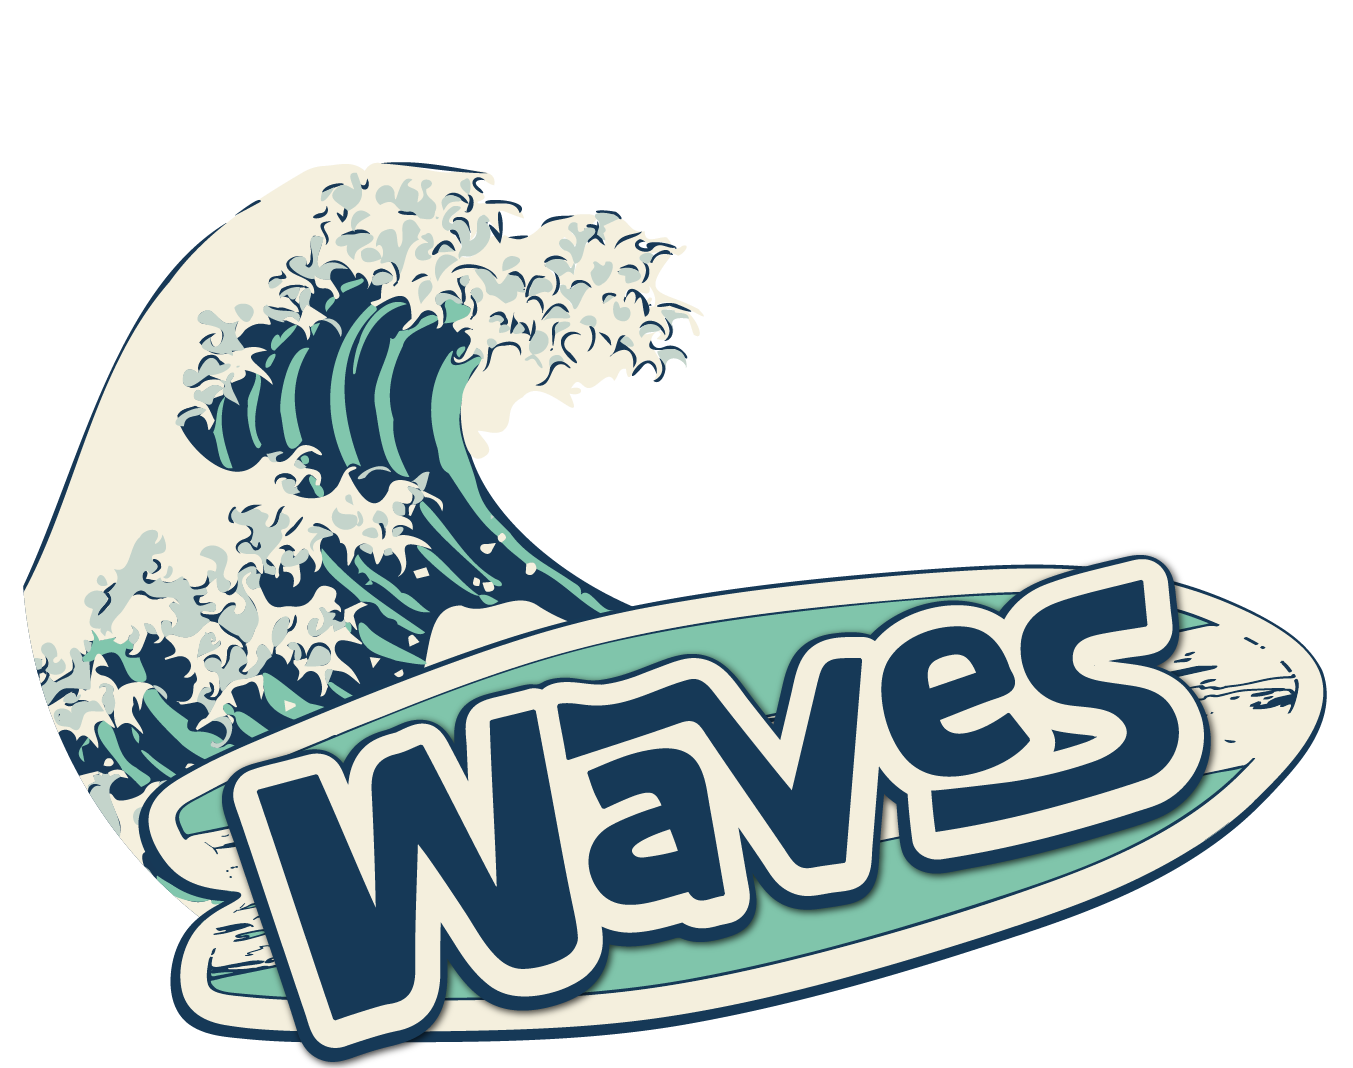 WAVES CAR WASH LOGO - VINTAGE SURFBOARD WITH THE WORD WAVES CAR WASH ON TOP and waves behind it